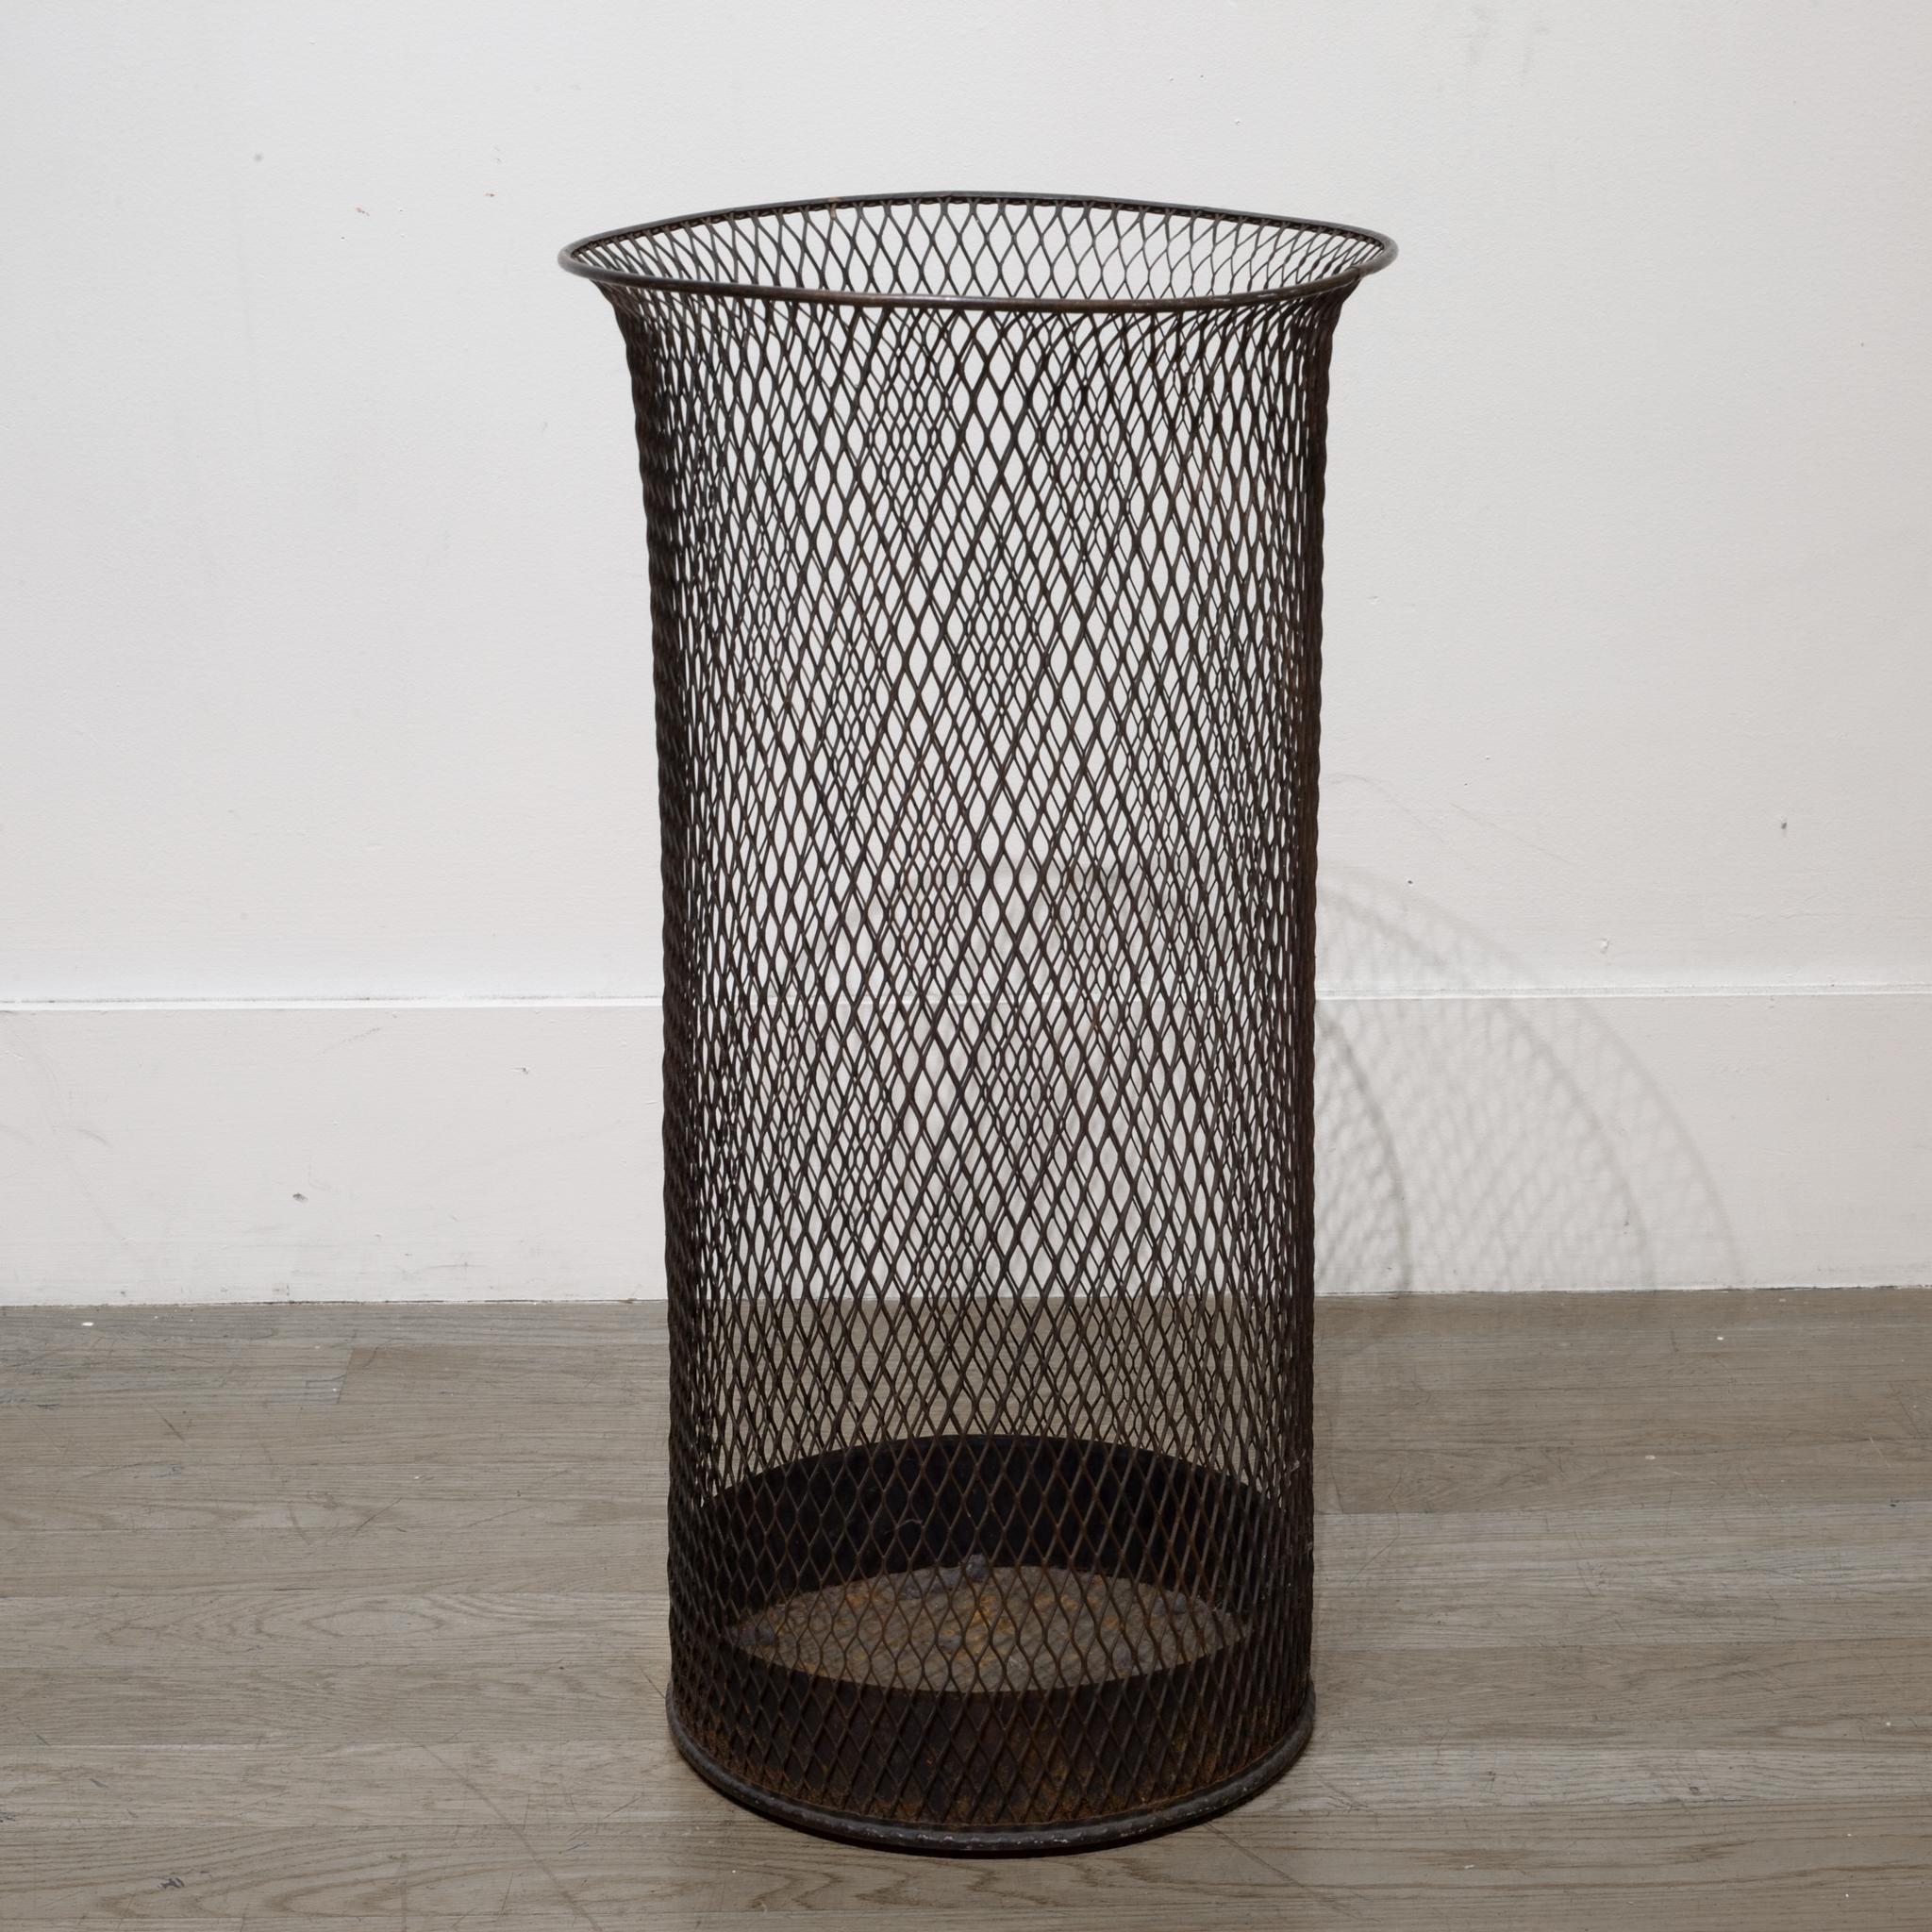 About

This is an original industrial steel mesh tall waste basket. This piece has retained its original finish and has the appropriate patina.

Creator: Nemco.
Date of manufacture: circa 1920
Materials and techniques: Steel mesh.
Condition